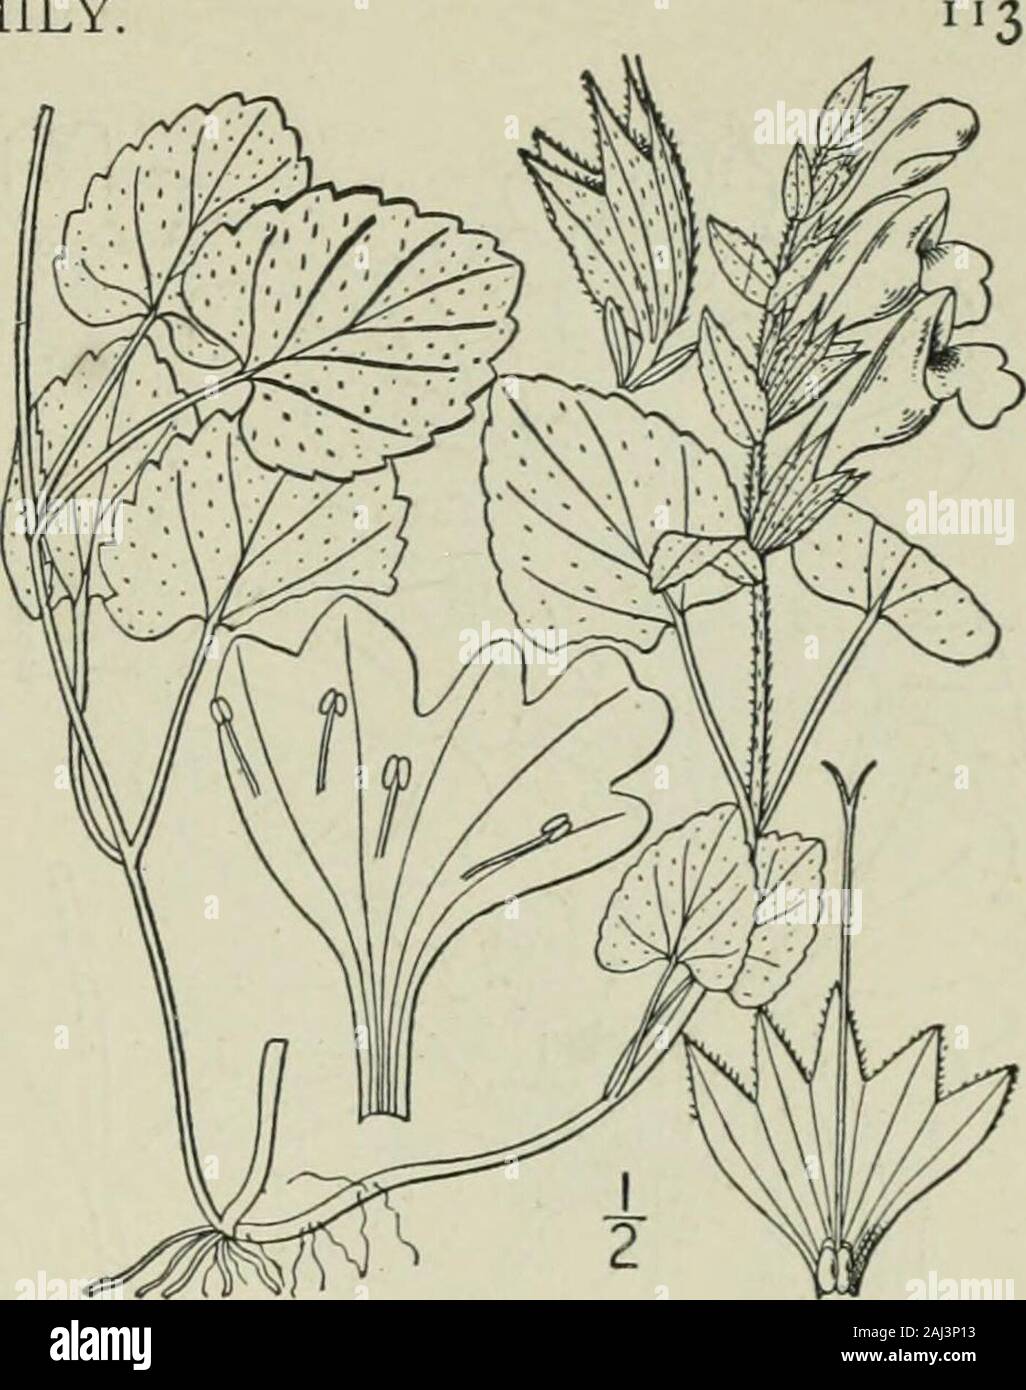 An illustrated flora of the northern United States, Canada and the British possessions : from Newfoundland to the parallel of the southern boundary of Virginia and from the Atlantic Ocean westward to the 102nd meridian . Genus 9. MINT FAMILY. I. Meehania cordata (Nutt.) Britton.Meehania. Fig. 3593. Dracocephalum cordatum Nutt. Gen. 2: 35. 1818.Cedronella cordata Benth. Lab. 502. 1834.Meehania cordata Britton, Bull. Torr. Club 21: 33.pi. 173. 1894. Flowering stems ascending, 3-8 high; stolonsvery slender, leafy throughout, sometimes 2°long. Leaves all broadly ovate or ovate-orbicu-lar, thin, ob Stock Photo